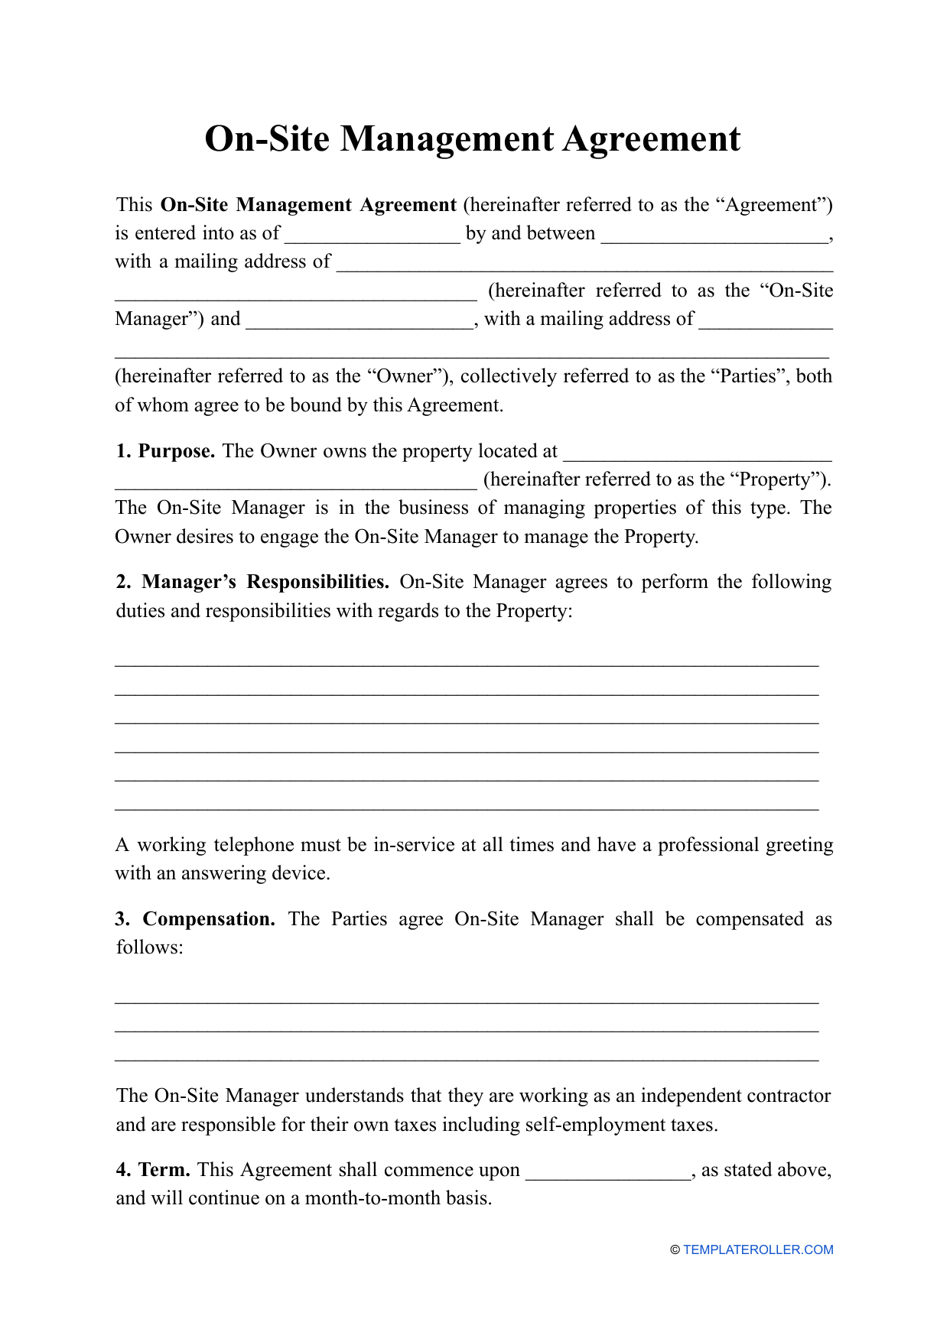 On-Site Management Agreement Template Download Printable PDF Throughout Business Management Contract Template